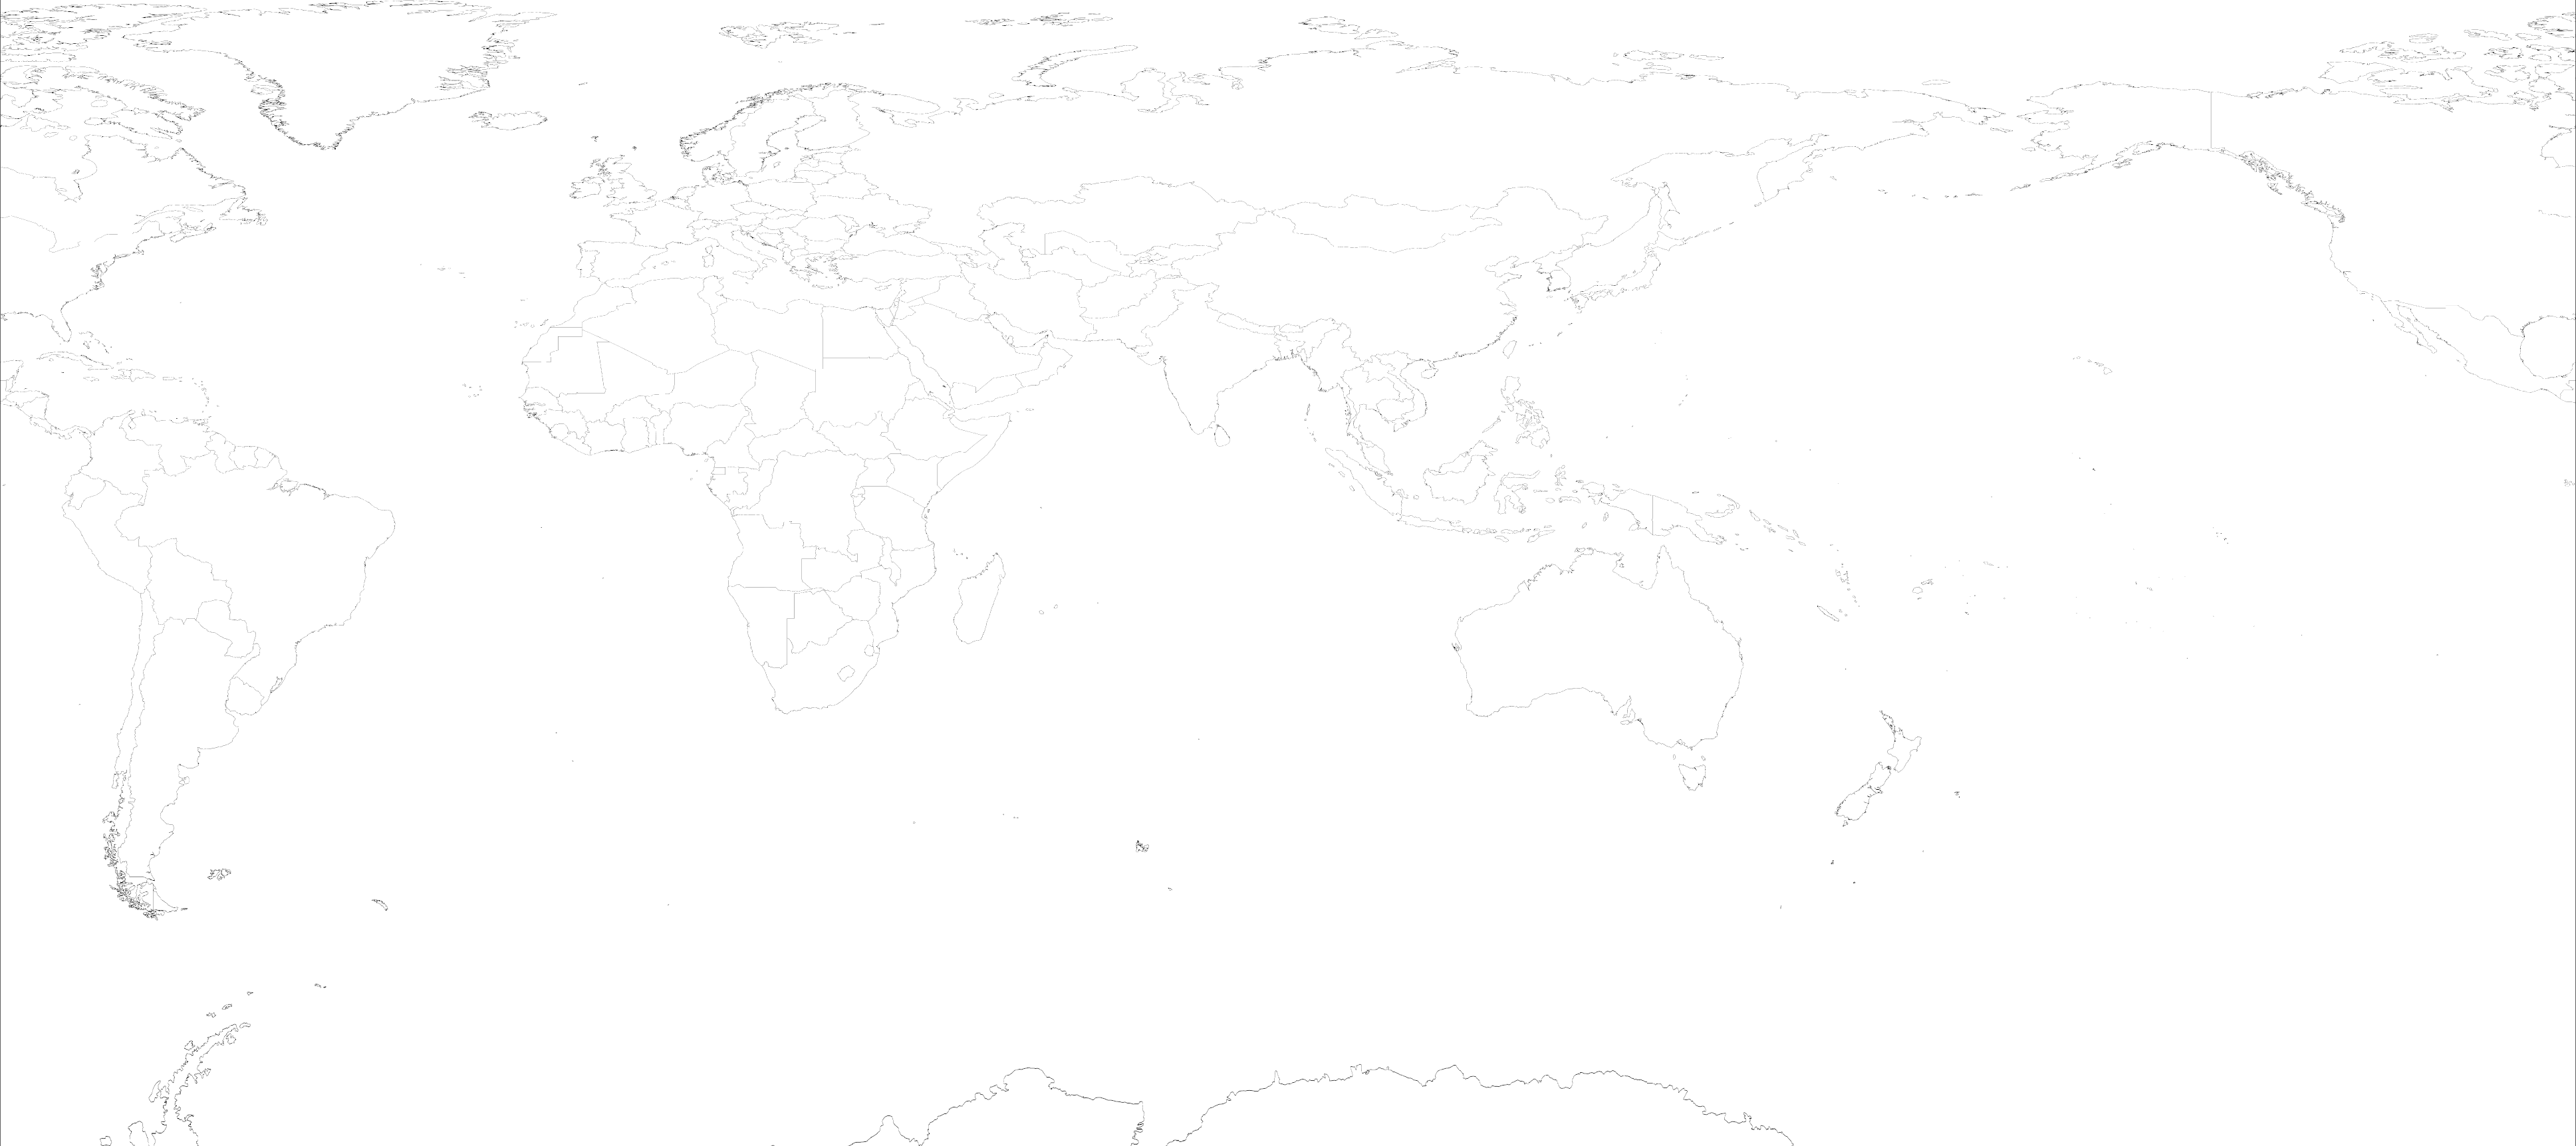 Keeping areas very realistic in Mercator projection